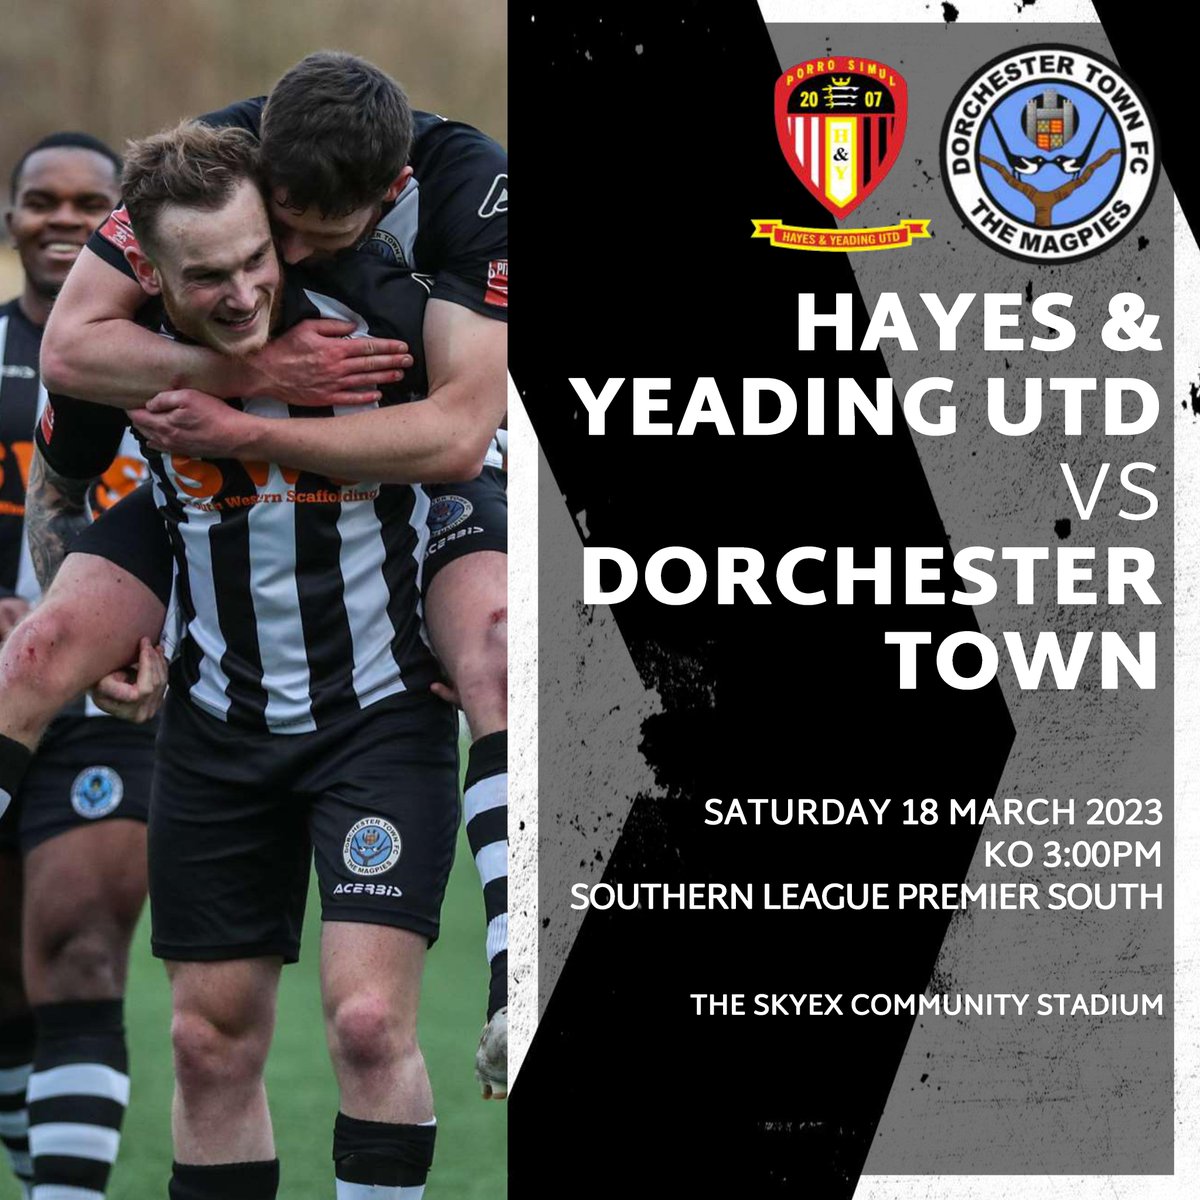 ⚽️ | 𝗠𝗔𝗧𝗖𝗛𝗗𝗔𝗬!

The Magpies travel to London as we take on @HYUFC_Official this afternoon 

Thank you to all supporters heading to the game and getting behind the lads! 👊

#WeAreDorch ⚫️⚪️